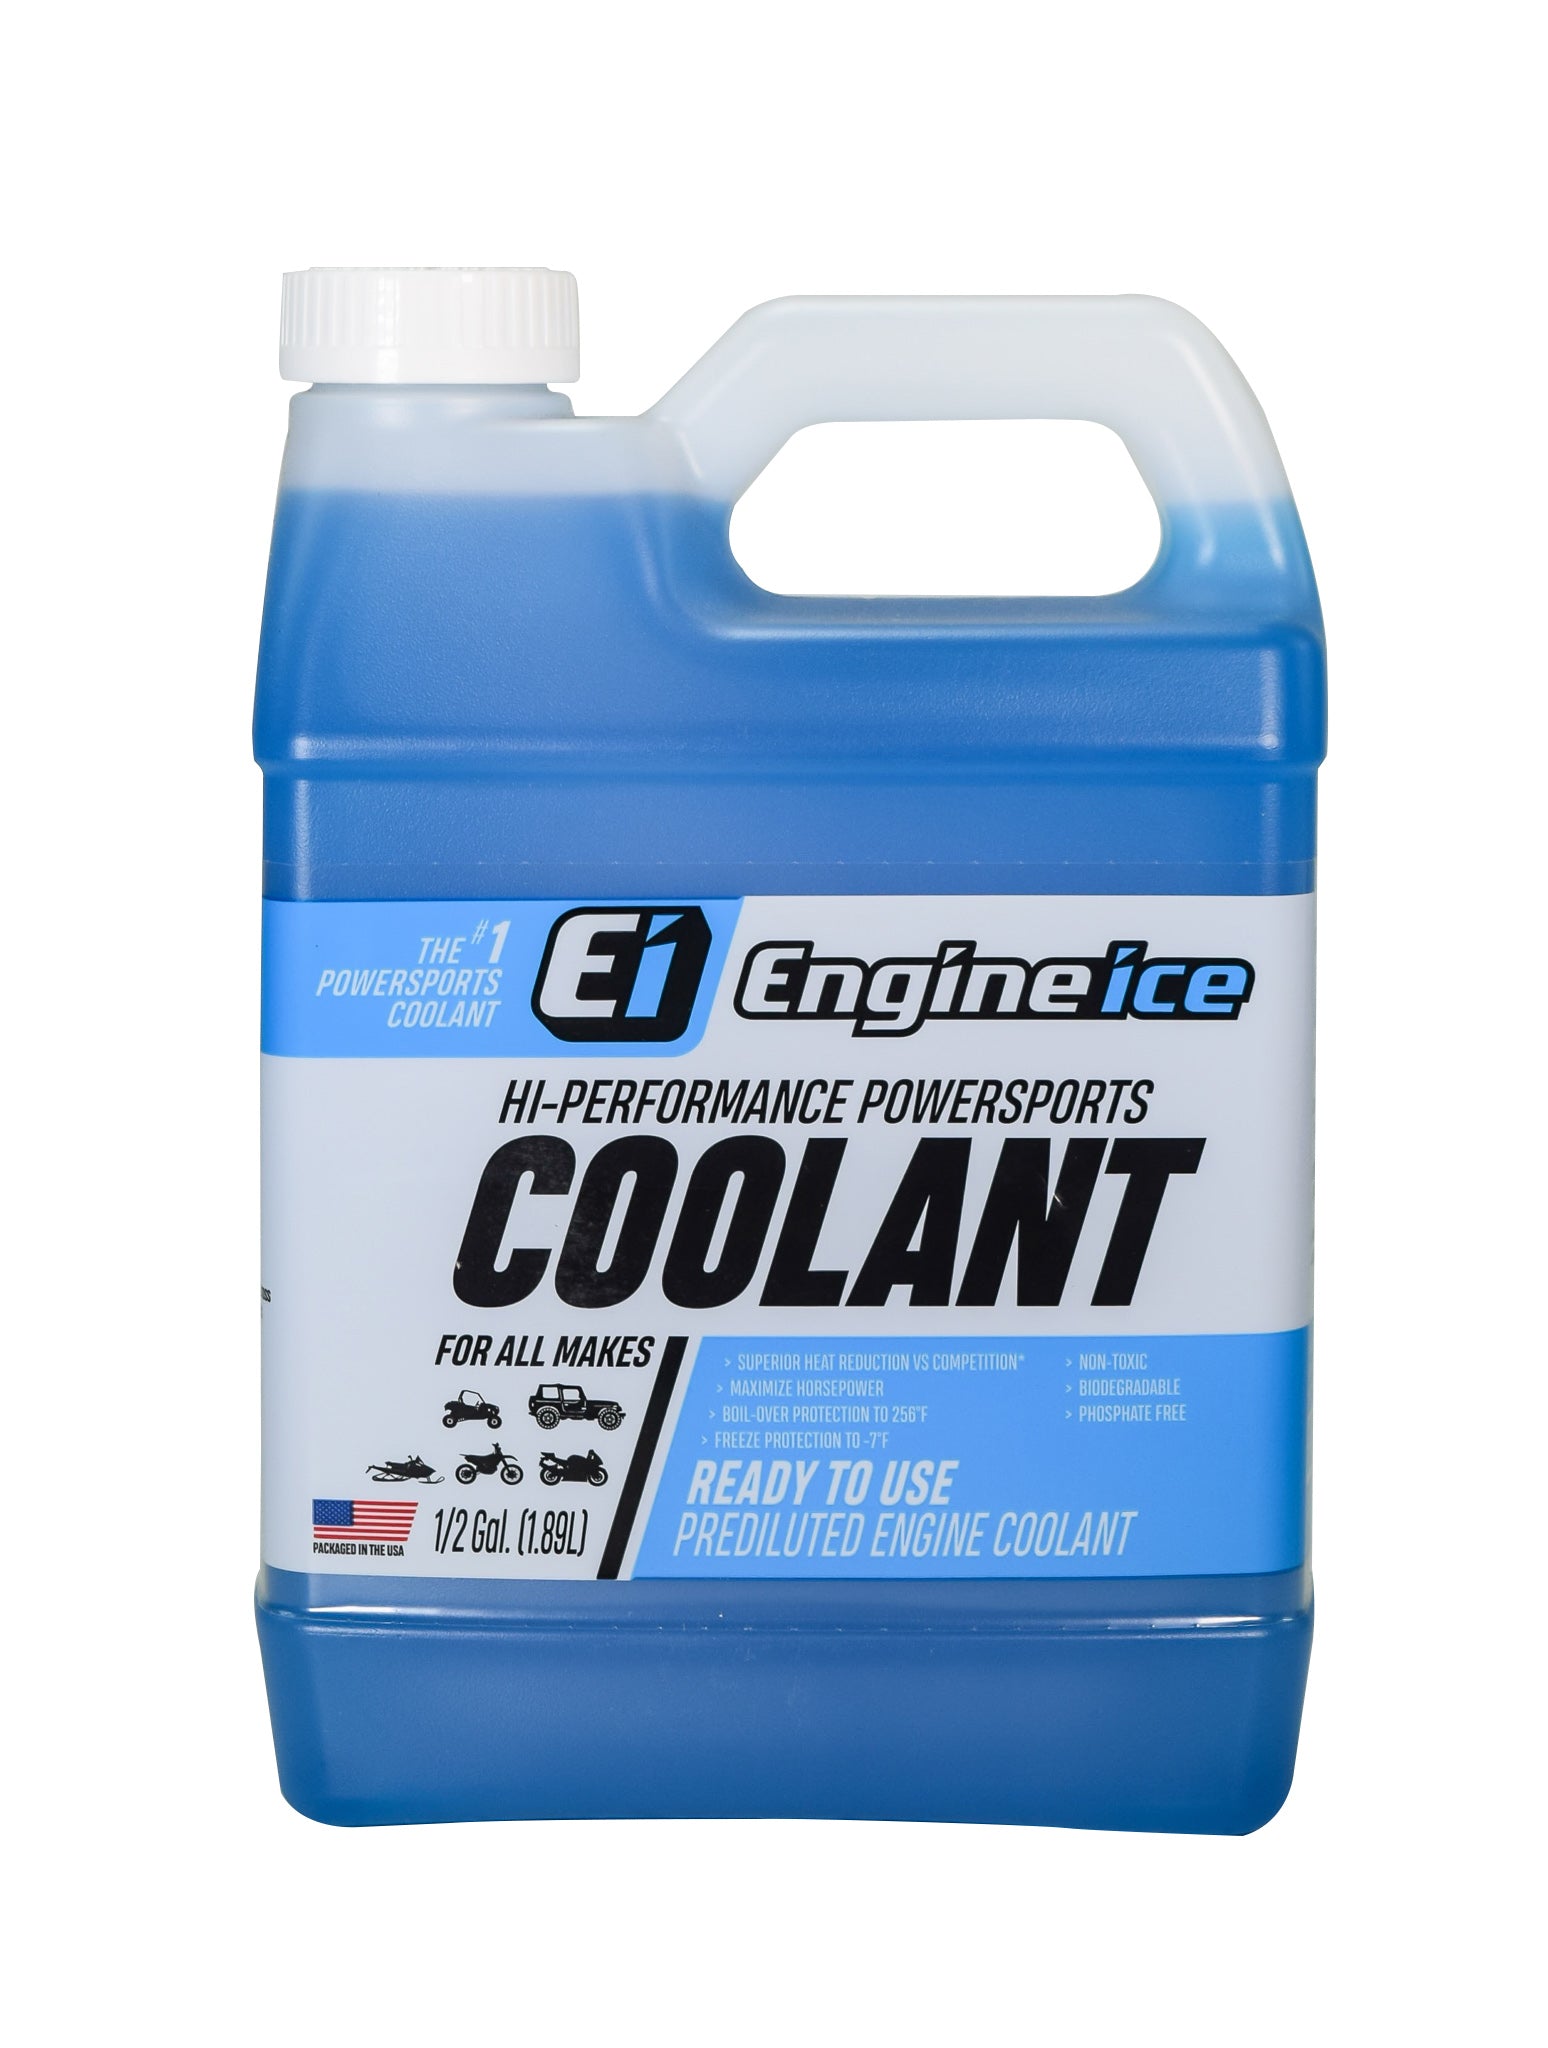 Engine Ice TYDS008-03 High Performance Coolant, 0.5 gallon, 4 Pack